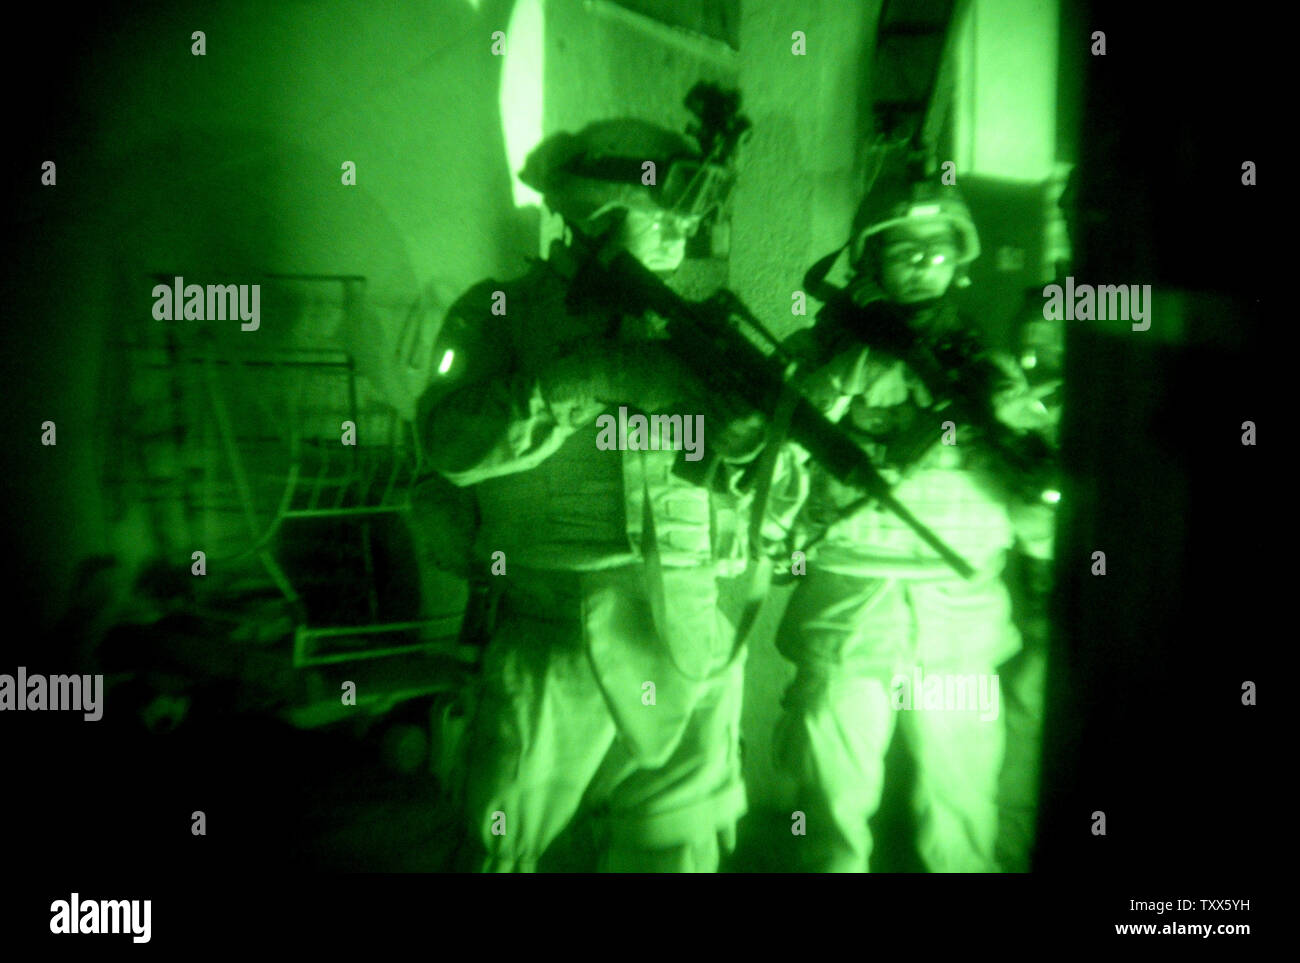 Elements of Charlie Company 1-184th Infantry of the  Californian Army National Guard, attached to 4th Brigade of the 3ID, conduct a raid on a insurgent house, in Baghdad, Iraq, on April 11, 2005. More than 500 Iraqi Security Forces, in cooperation with Task Force Baghdad Soldiers, searched more than 90 targets and detained 65 suspected terrorists in the Al-Rasheed district during raids early Monday morning in Baghdad.     (UPI Photo/Ken James) Stock Photo